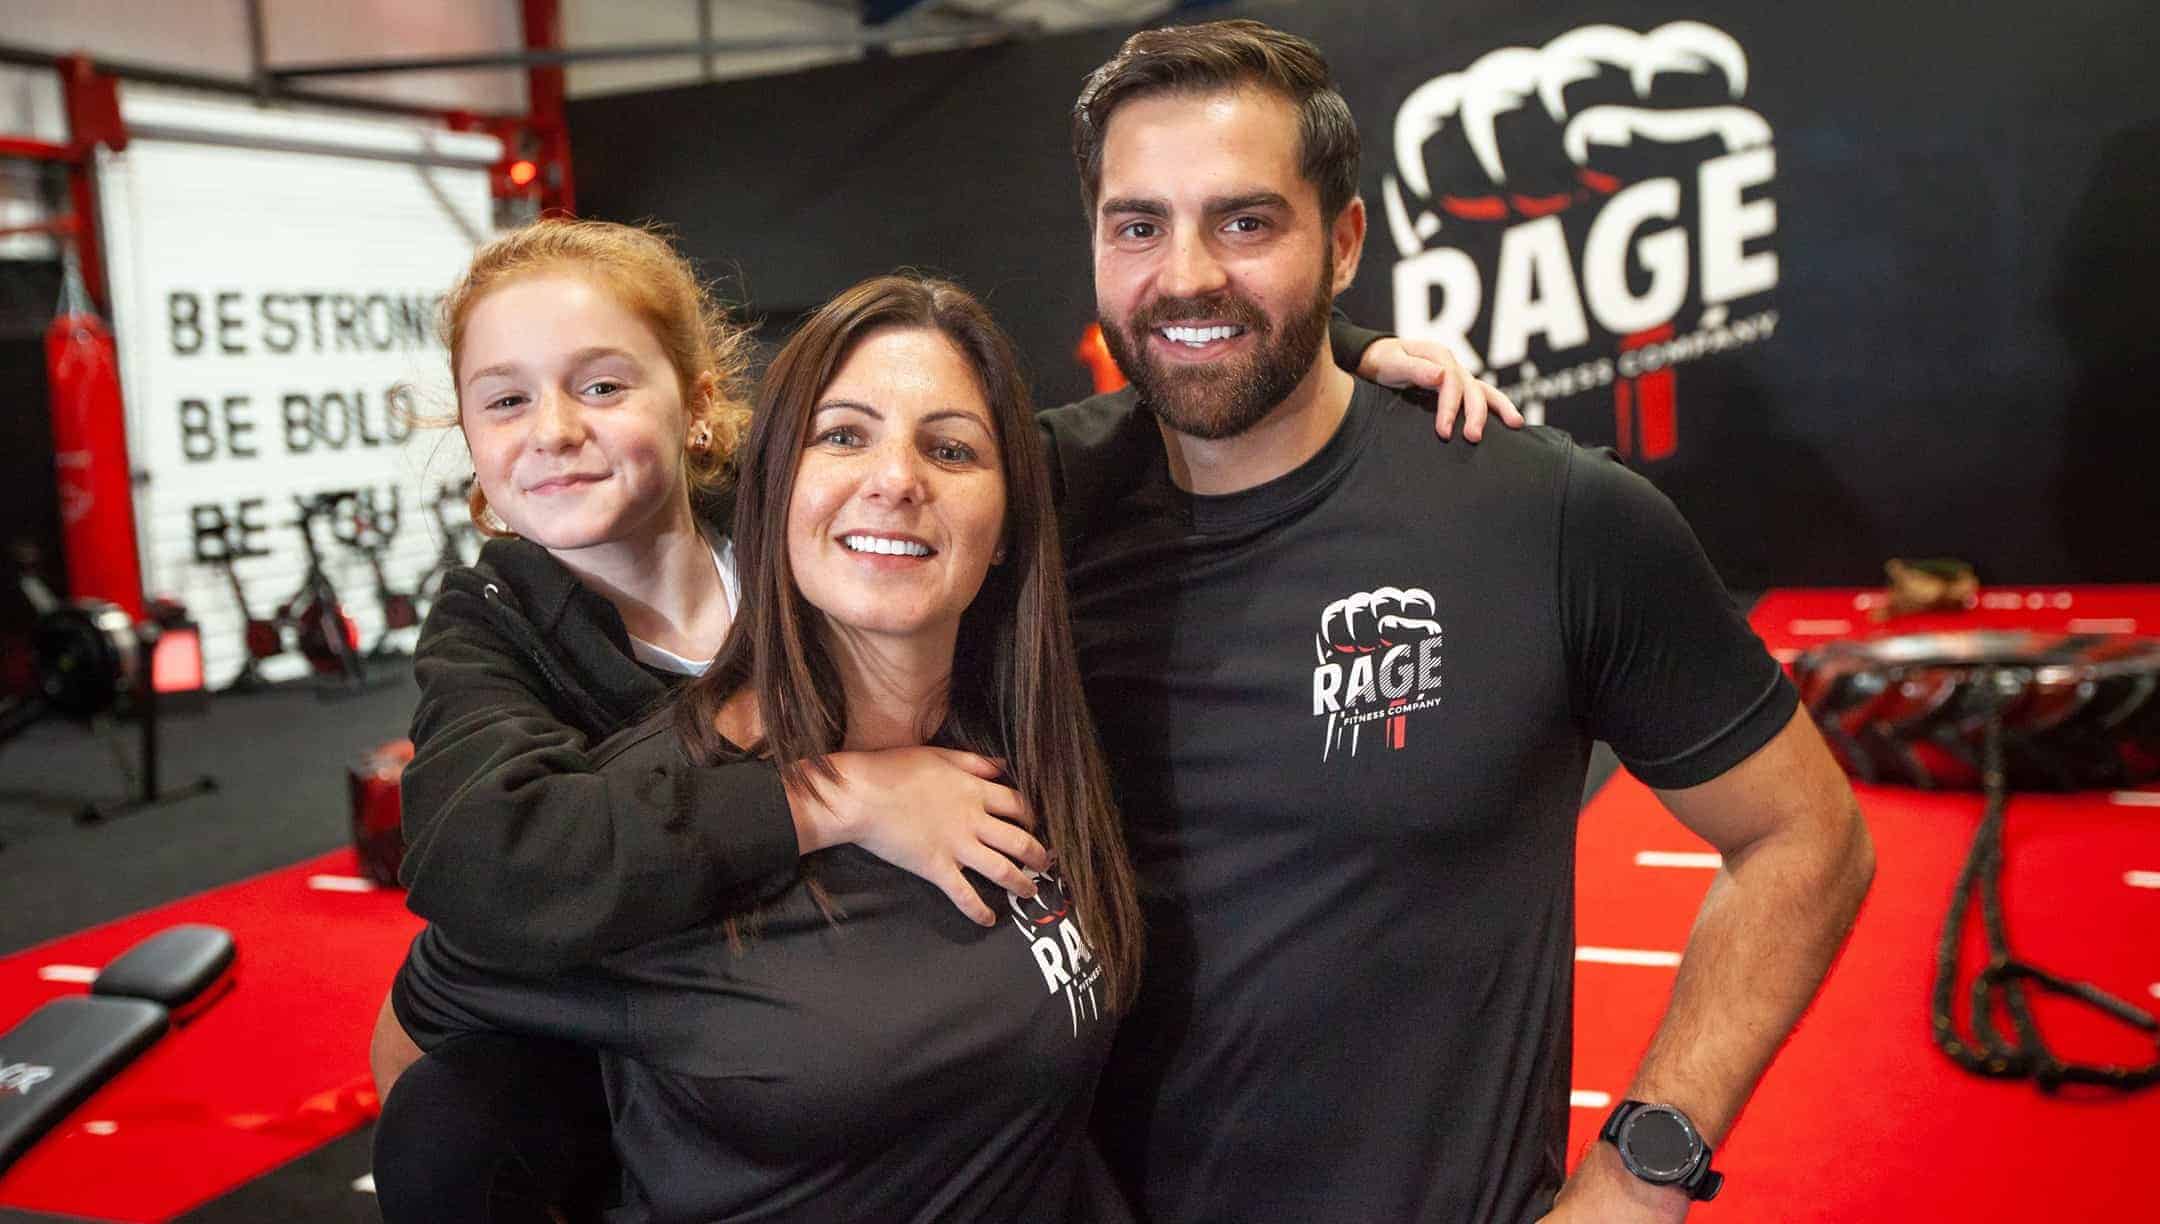 Rage Fitness Gym Launch